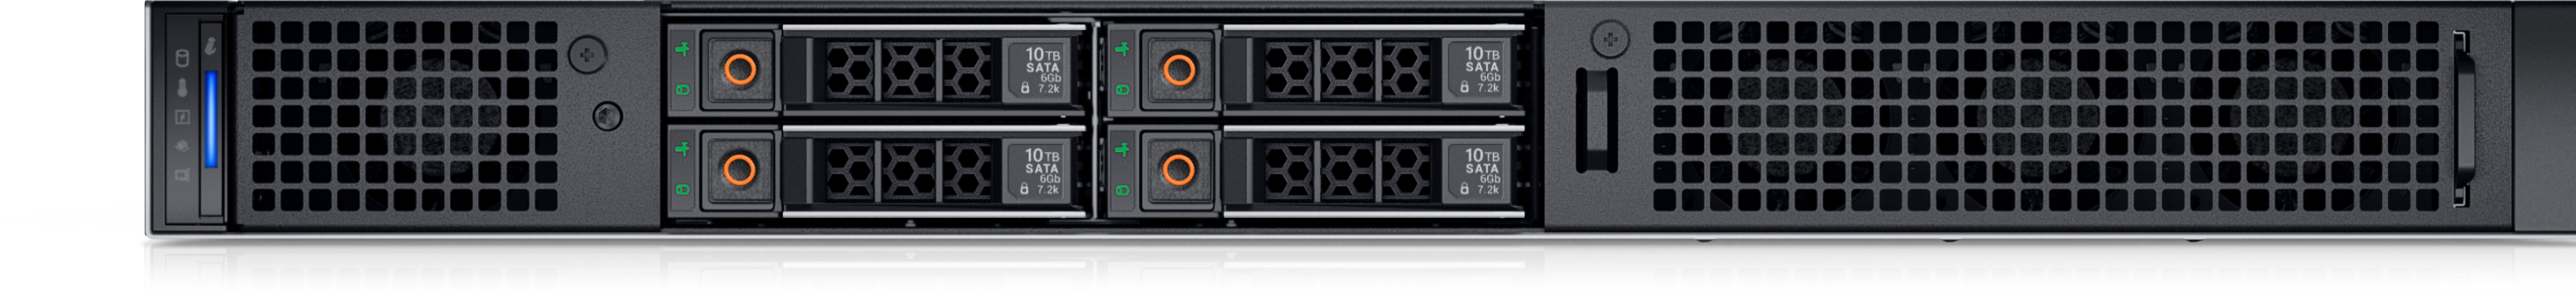 PowerEdge XR11 4 x 2.5 Front Access Back Facing